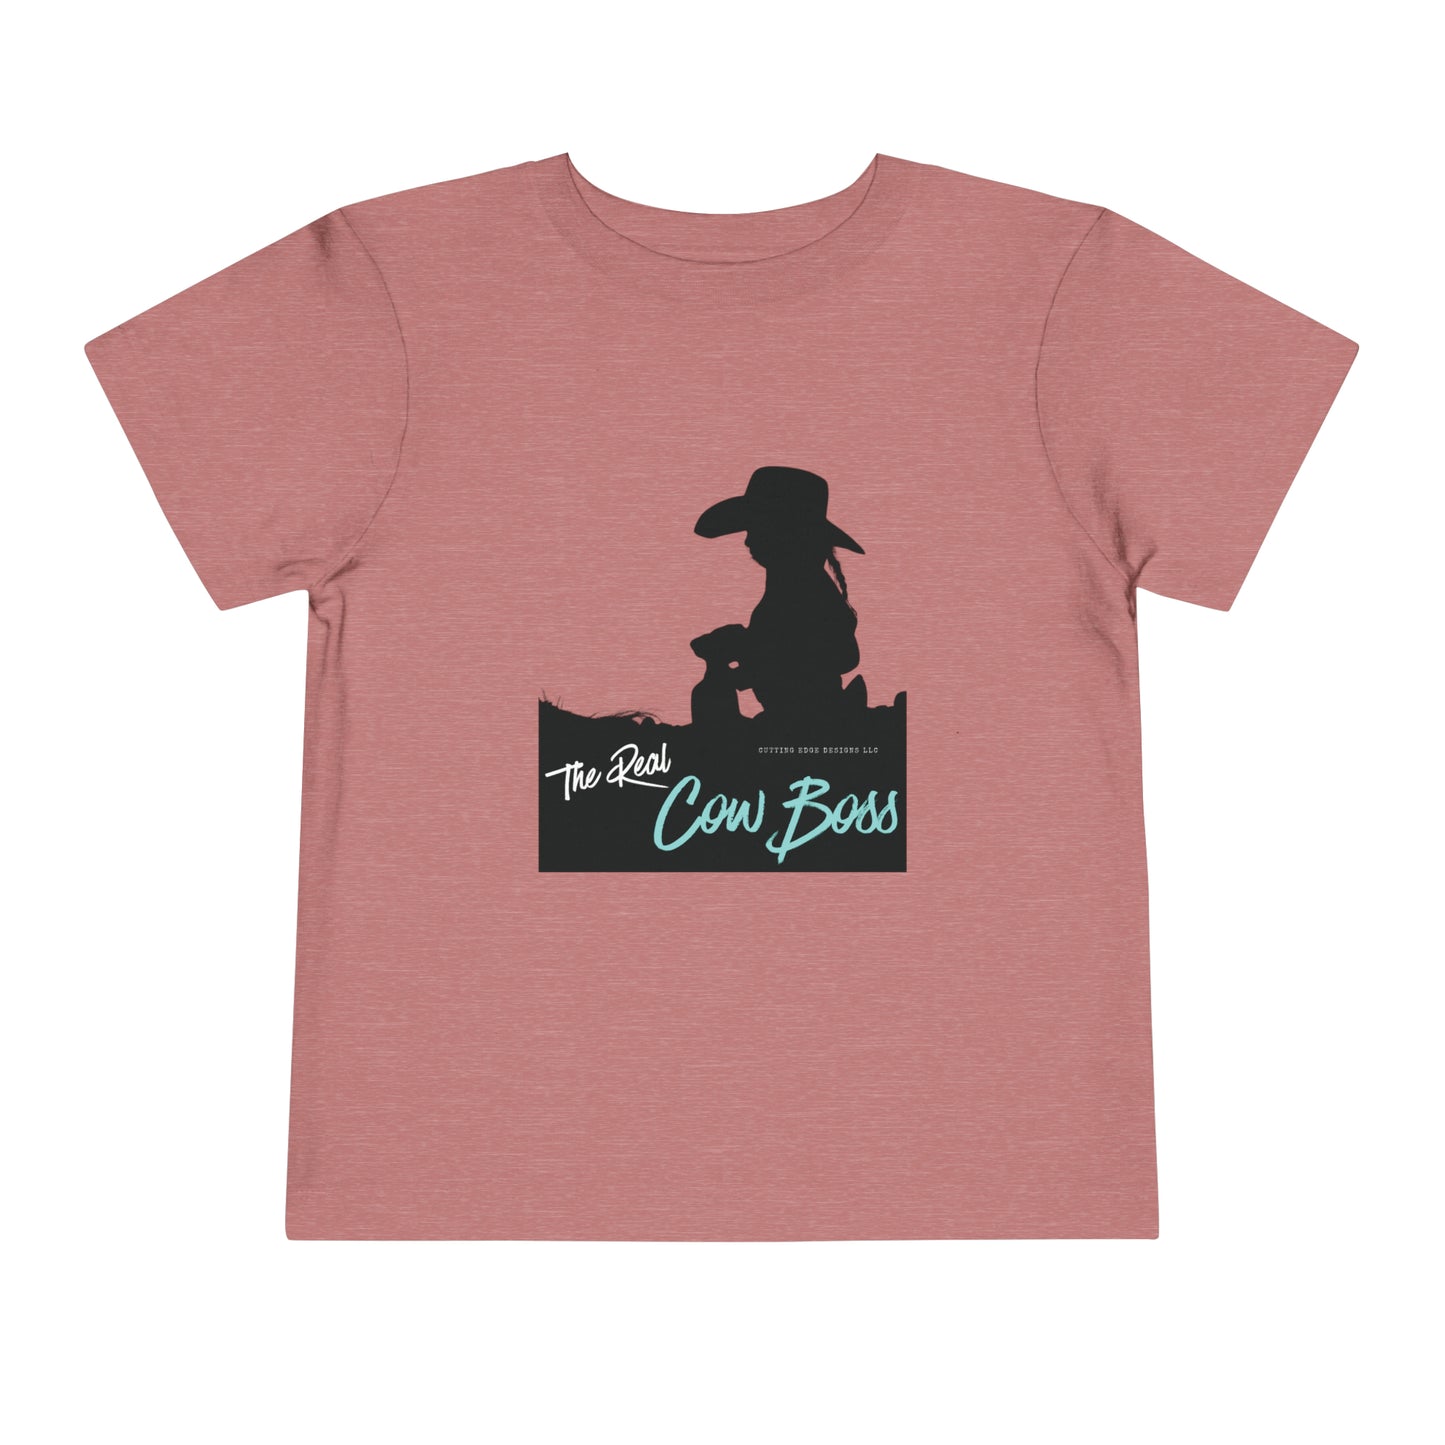 The Real Cow Boss Toddler Girls Tee